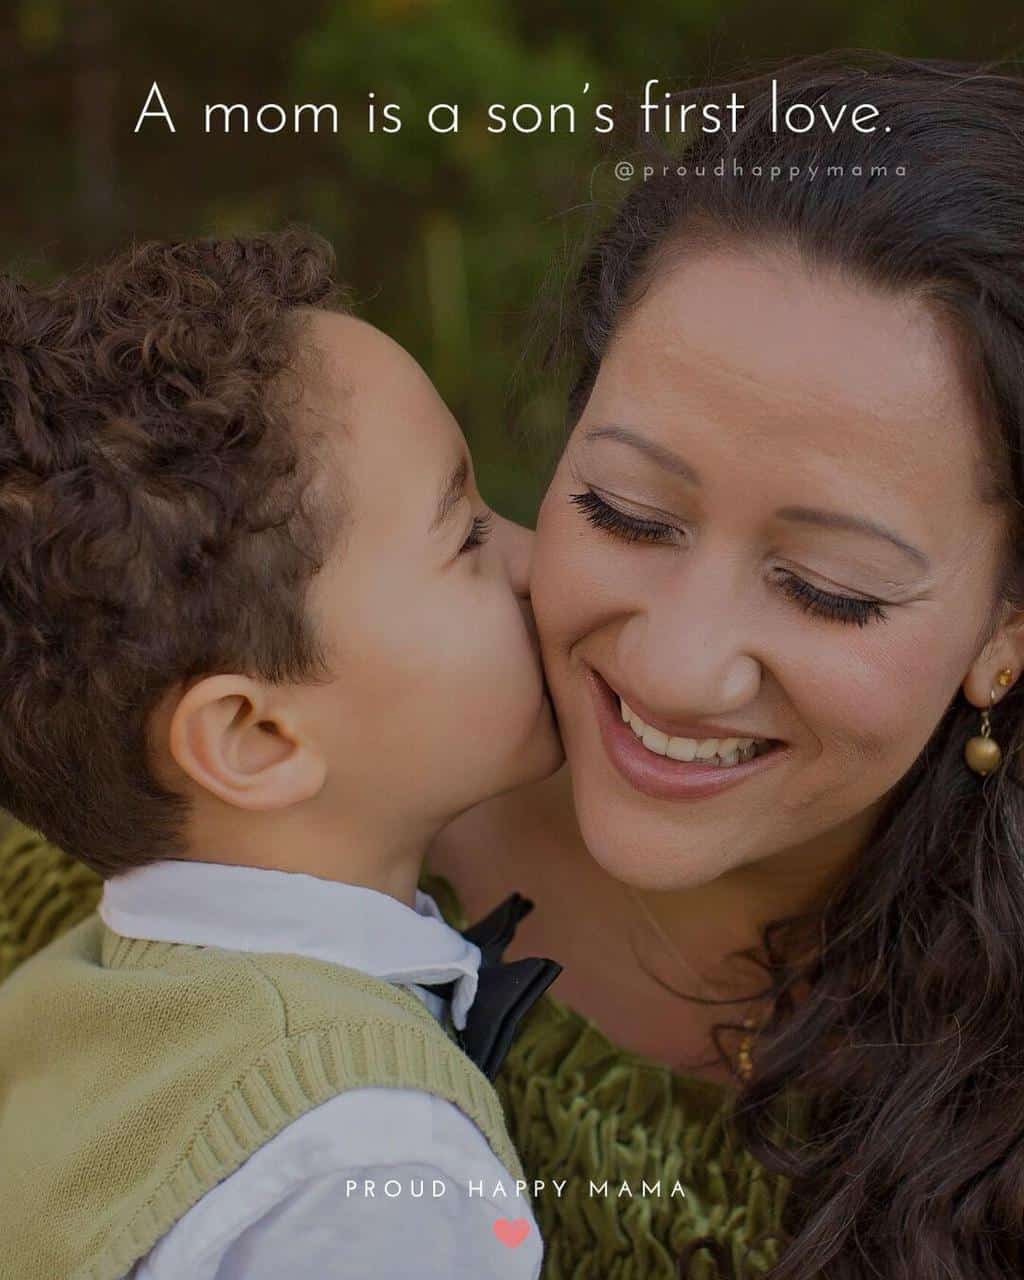 Mothers Day Poems Son | A mom is a son’s first love.